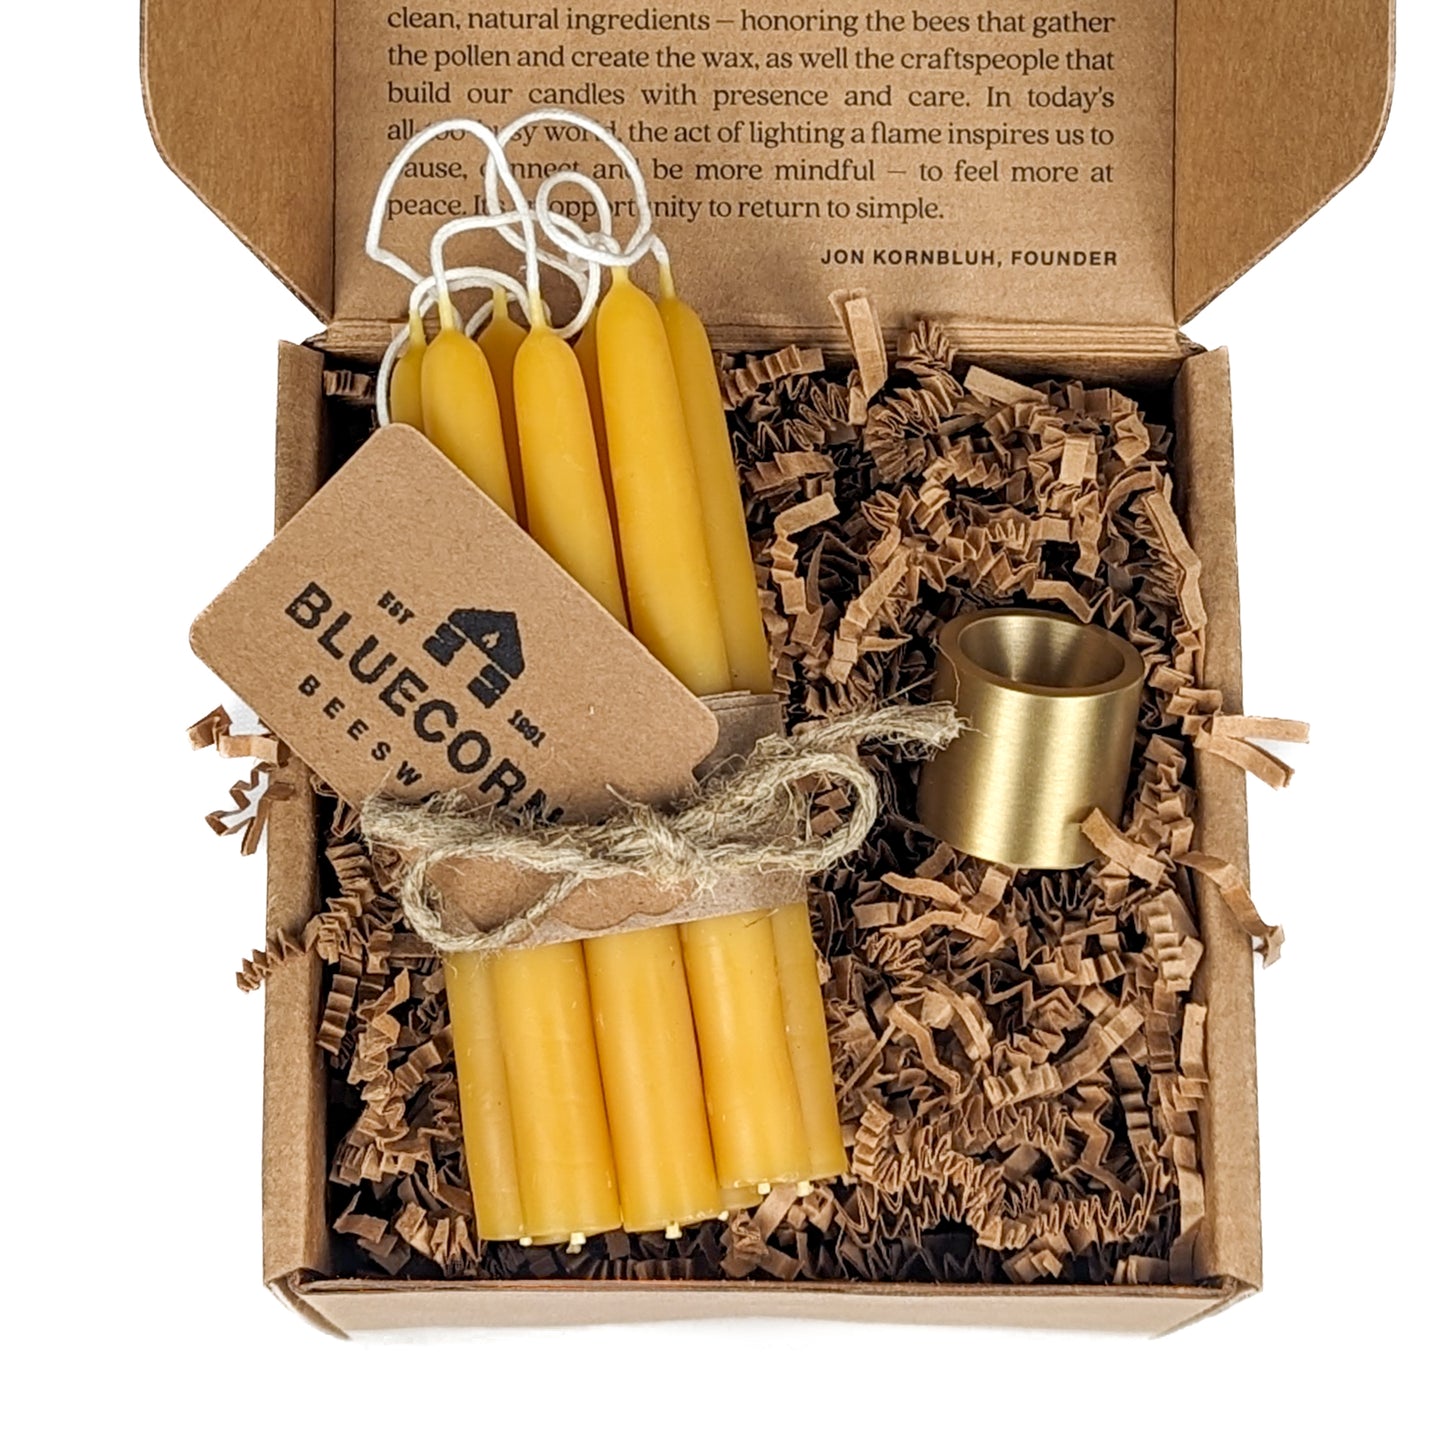 Ceremony Beeswax Candles & Brass Holder Gift Set